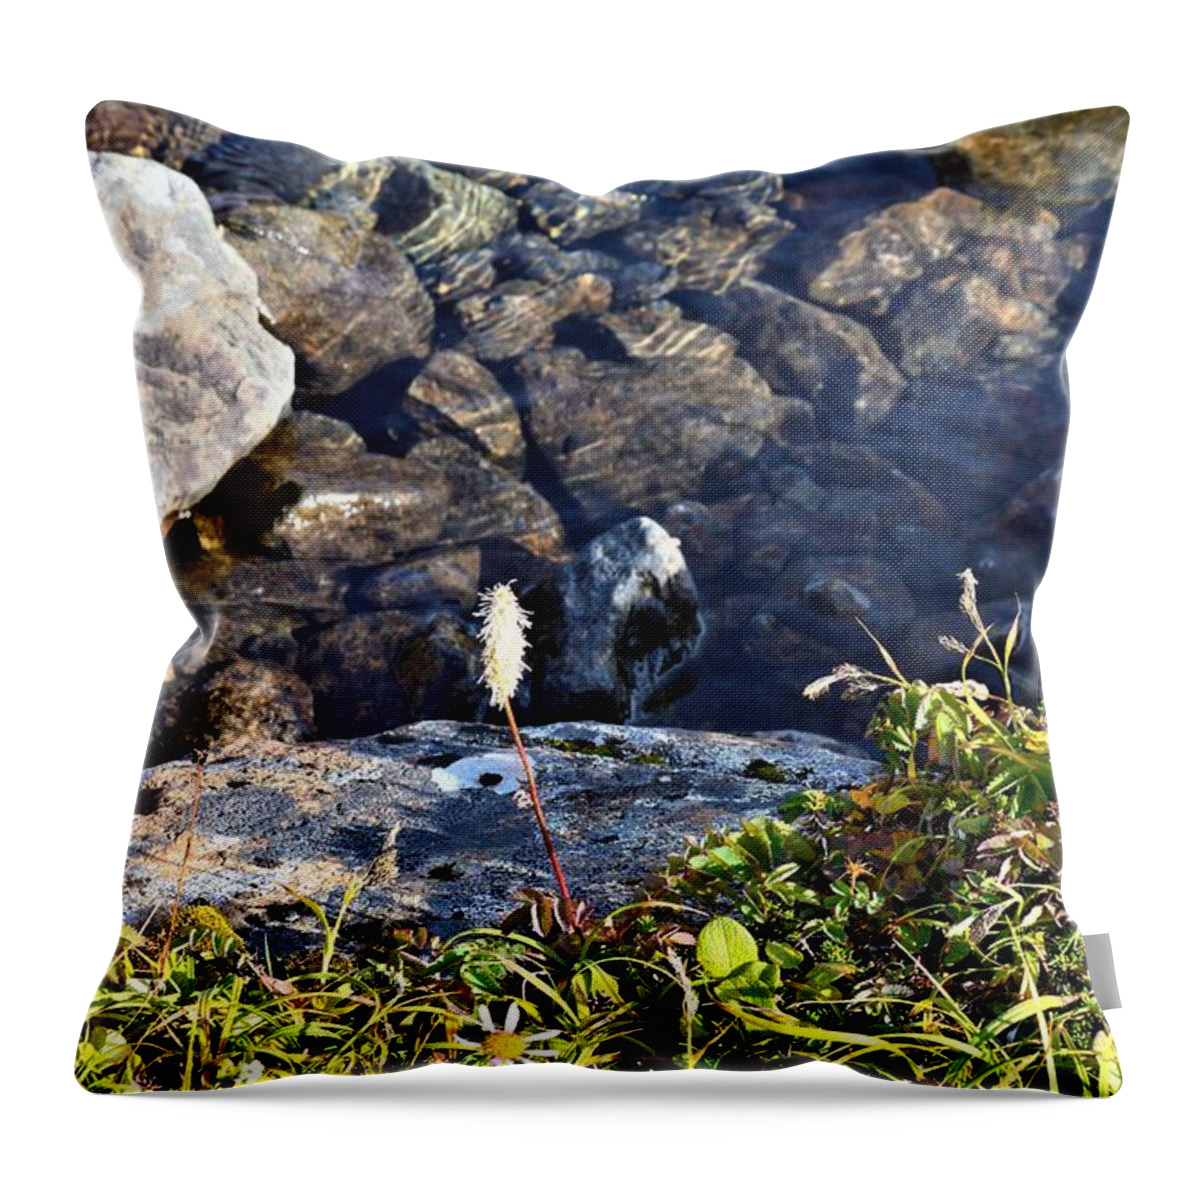 Plants Throw Pillow featuring the photograph Plants Growing By Creek by David Crewdson